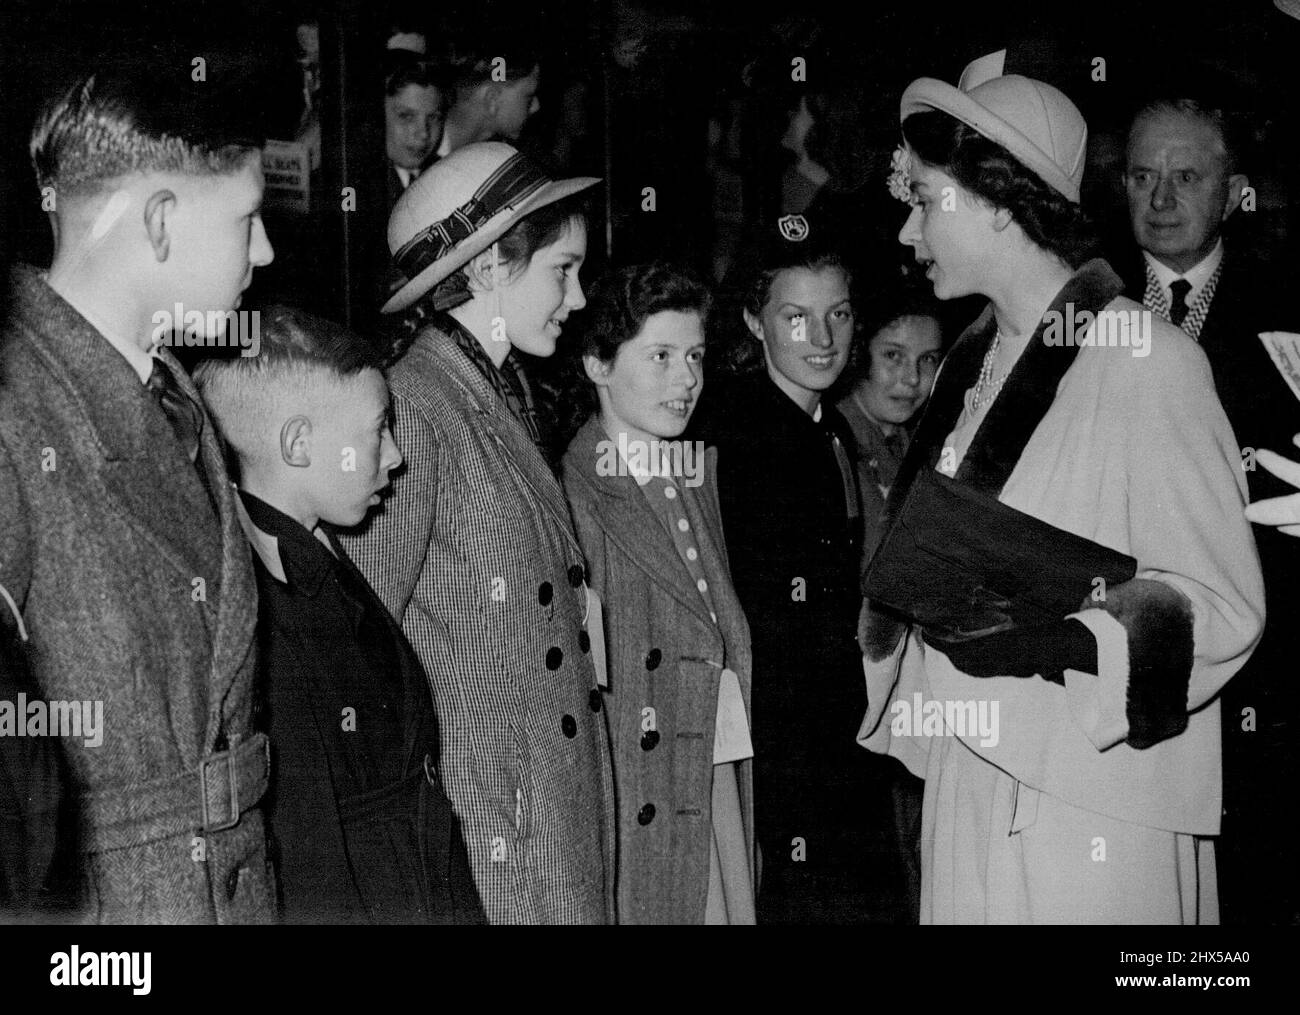 Princess Elizabeth, on the eve of her 23rd birthday, with the children at Victoria to-day. Fifty Childers, 25 boys and 25 girls chosen from bomb Victims and orphans in London, Manchester, Birmingham and Plymouth, holiday, they are to spend four weeks in Lucerne, Switzerland at the expense of the hoteliers and City Council of Lucerne to celebrate the birth of Prince Charles. Princess Elizabeth was at Victoria Station to see them off. She spoke to many of them and also to French boys and girls who were returning to their homes round Lille after a heliday in England. April 20, 1949. Stock Photo